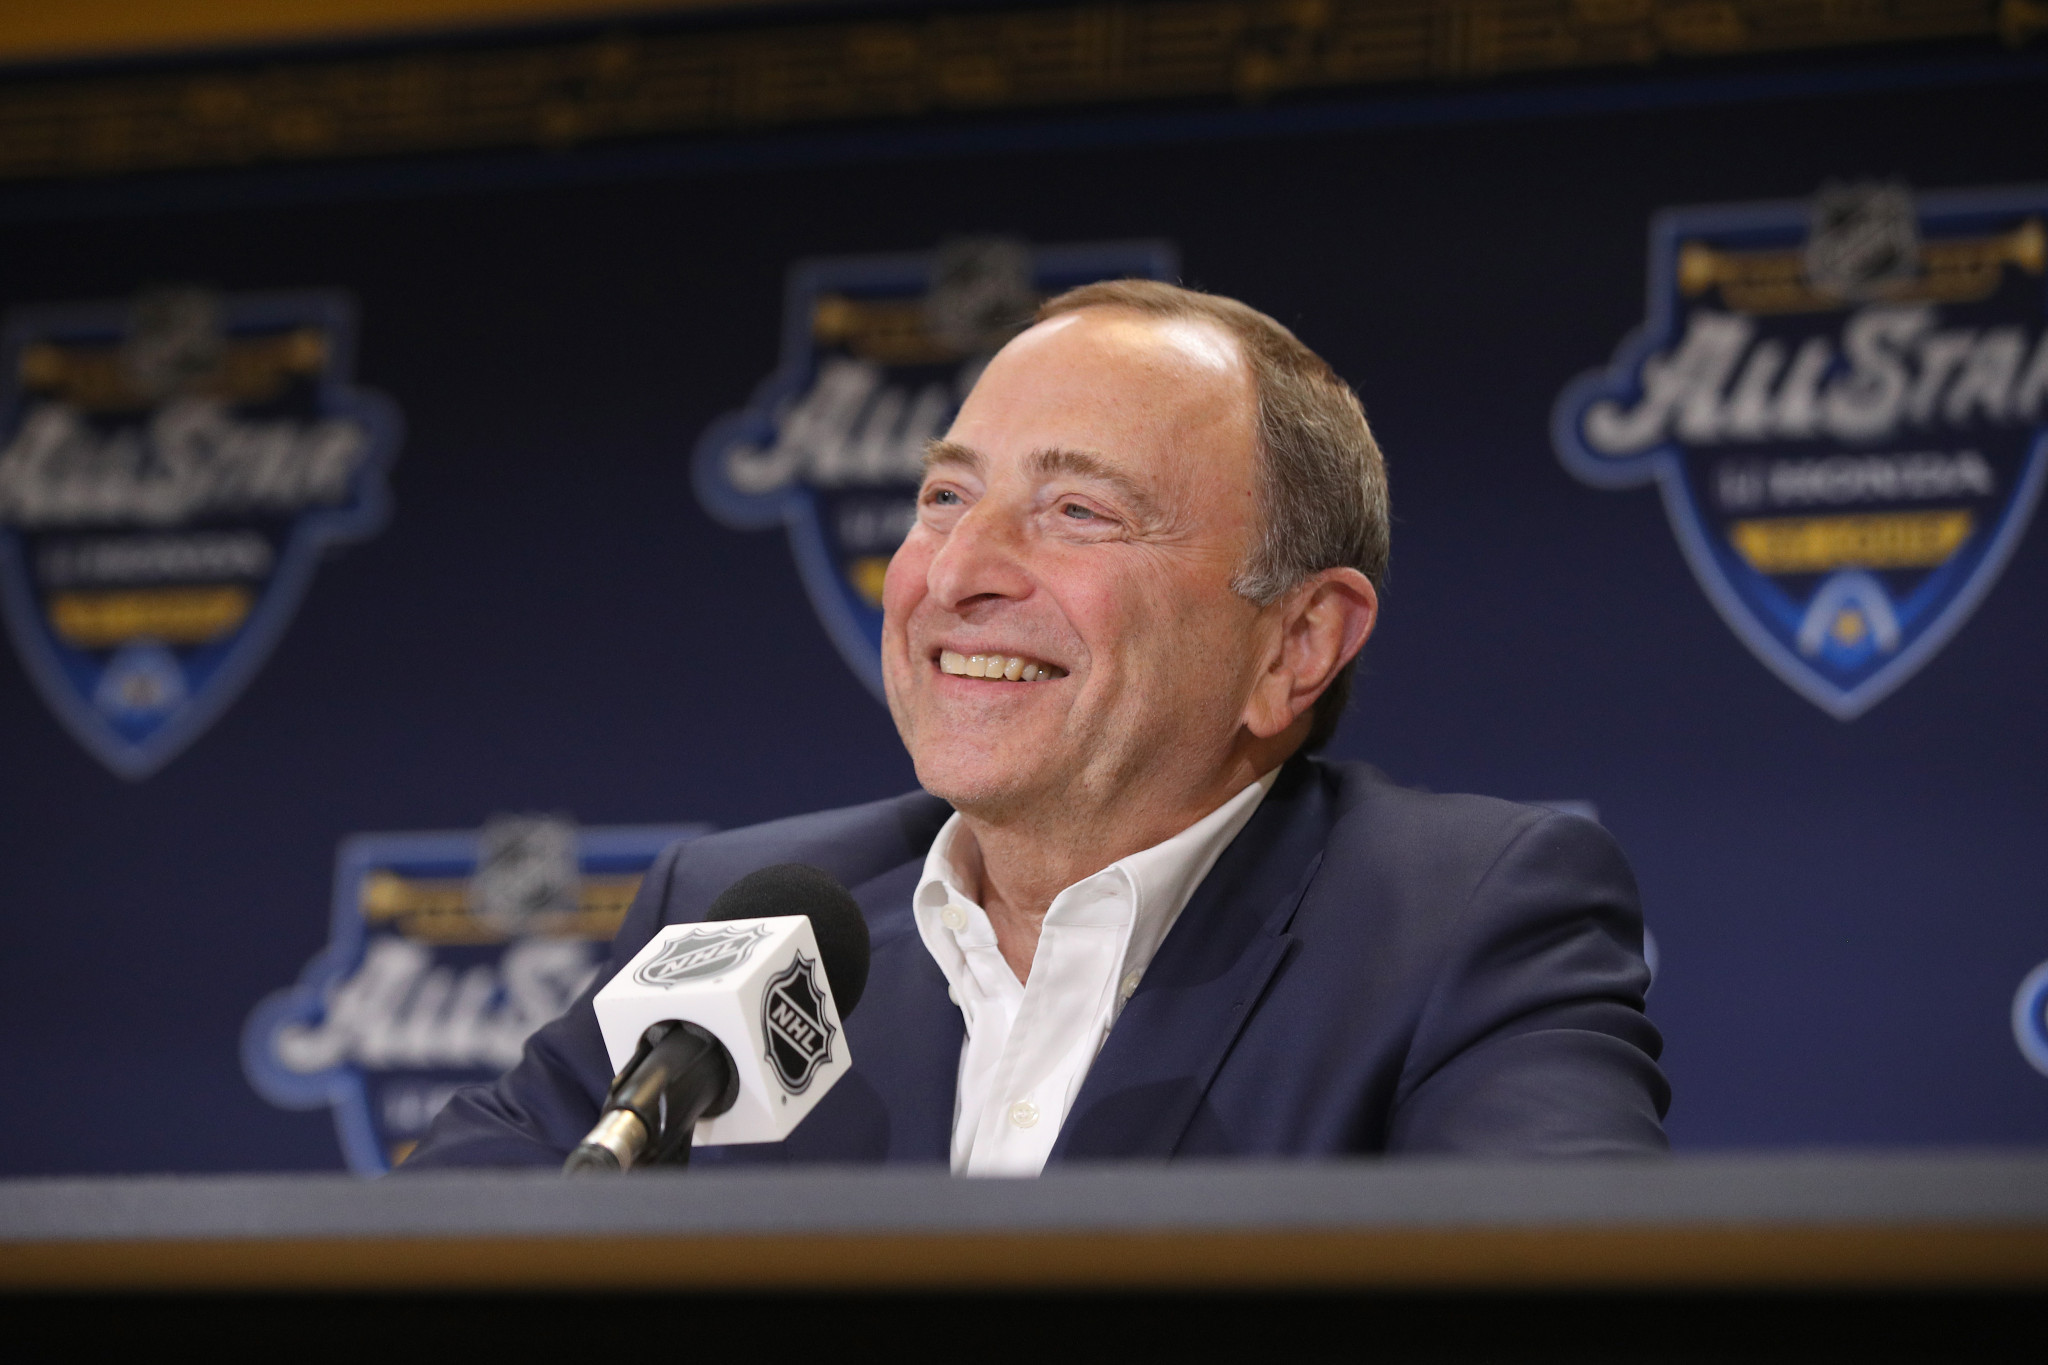 NHL Commissioner Gary Bettman said disruption to the league season meant the Winter Olympics was no longer feasible ©Getty Images